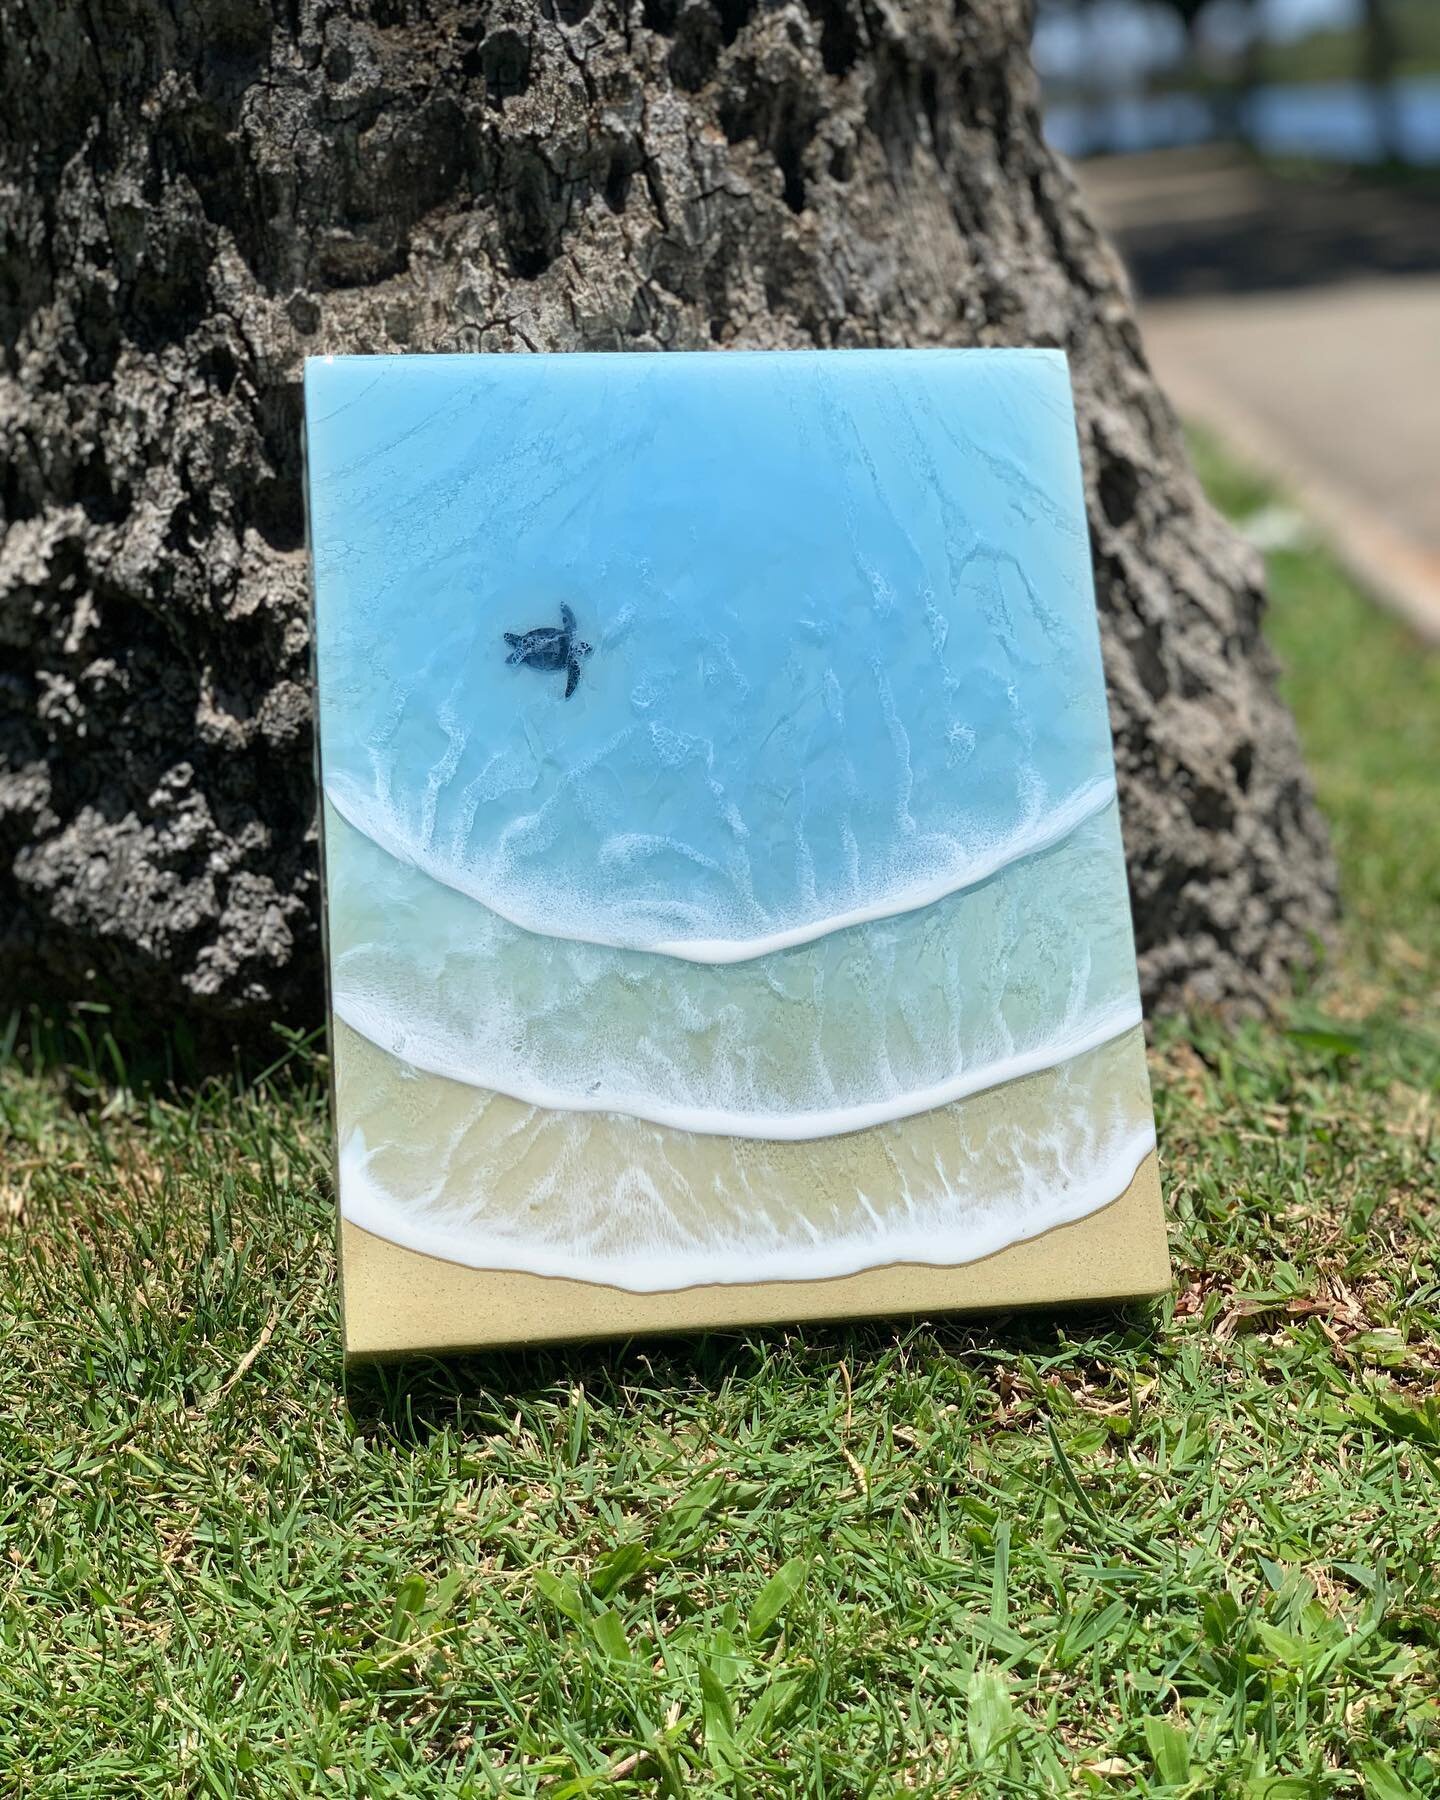 8x10 minis coming in hot&hellip; or wet? Whatever you want to call it grab em while you can!  #waikiki #oahu #honu #yespromarinesupplies #promarinesupplies #epoxyart #madewithaloha #luckywelivehi #havealohawilltravel